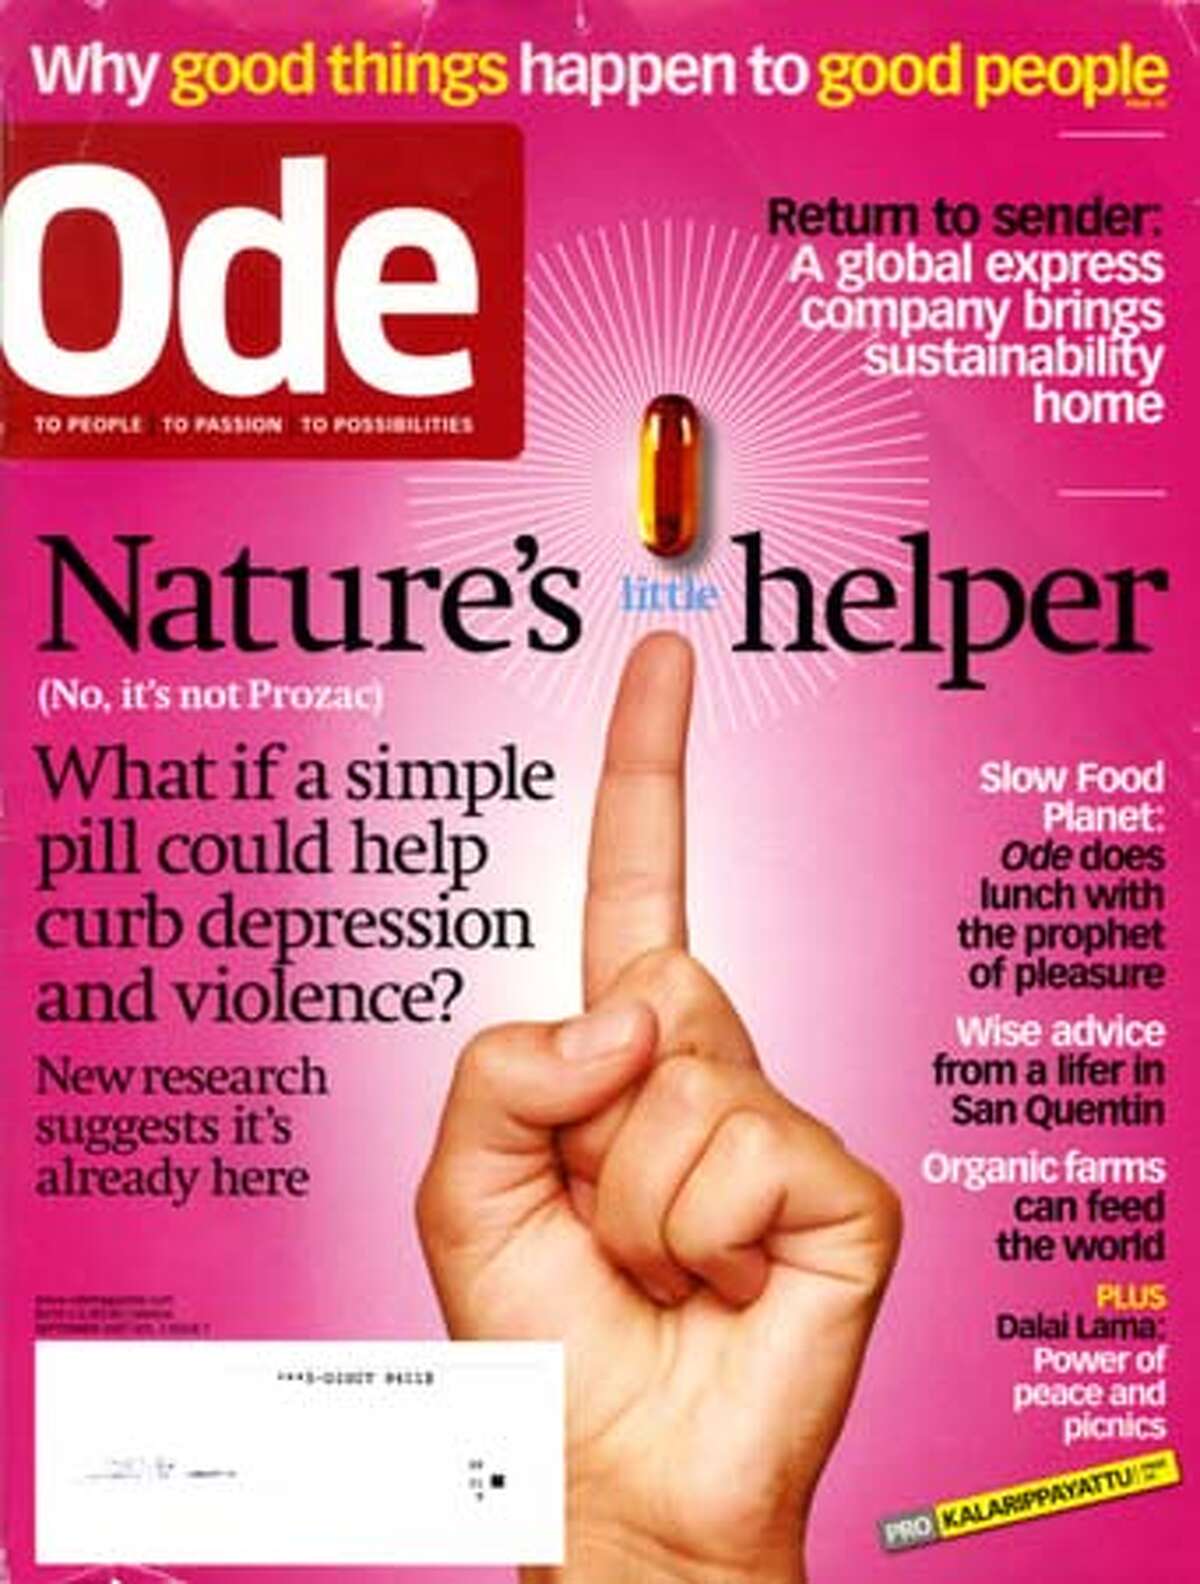 Ode magazine opens offices in Marin. One of several lifestyle magazines setting up shop in the North Bay. Ran on: 10-05-2007 Odes co-founder Jurriaan Kamp (center, standing) meets with staffers (from left) Katie Keenan (seated), Mimi Dutta, co-founder Helene de Puy, Nina Witt, Marco Visscher and Marlene Saritzky. Ran on: 10-05-2007